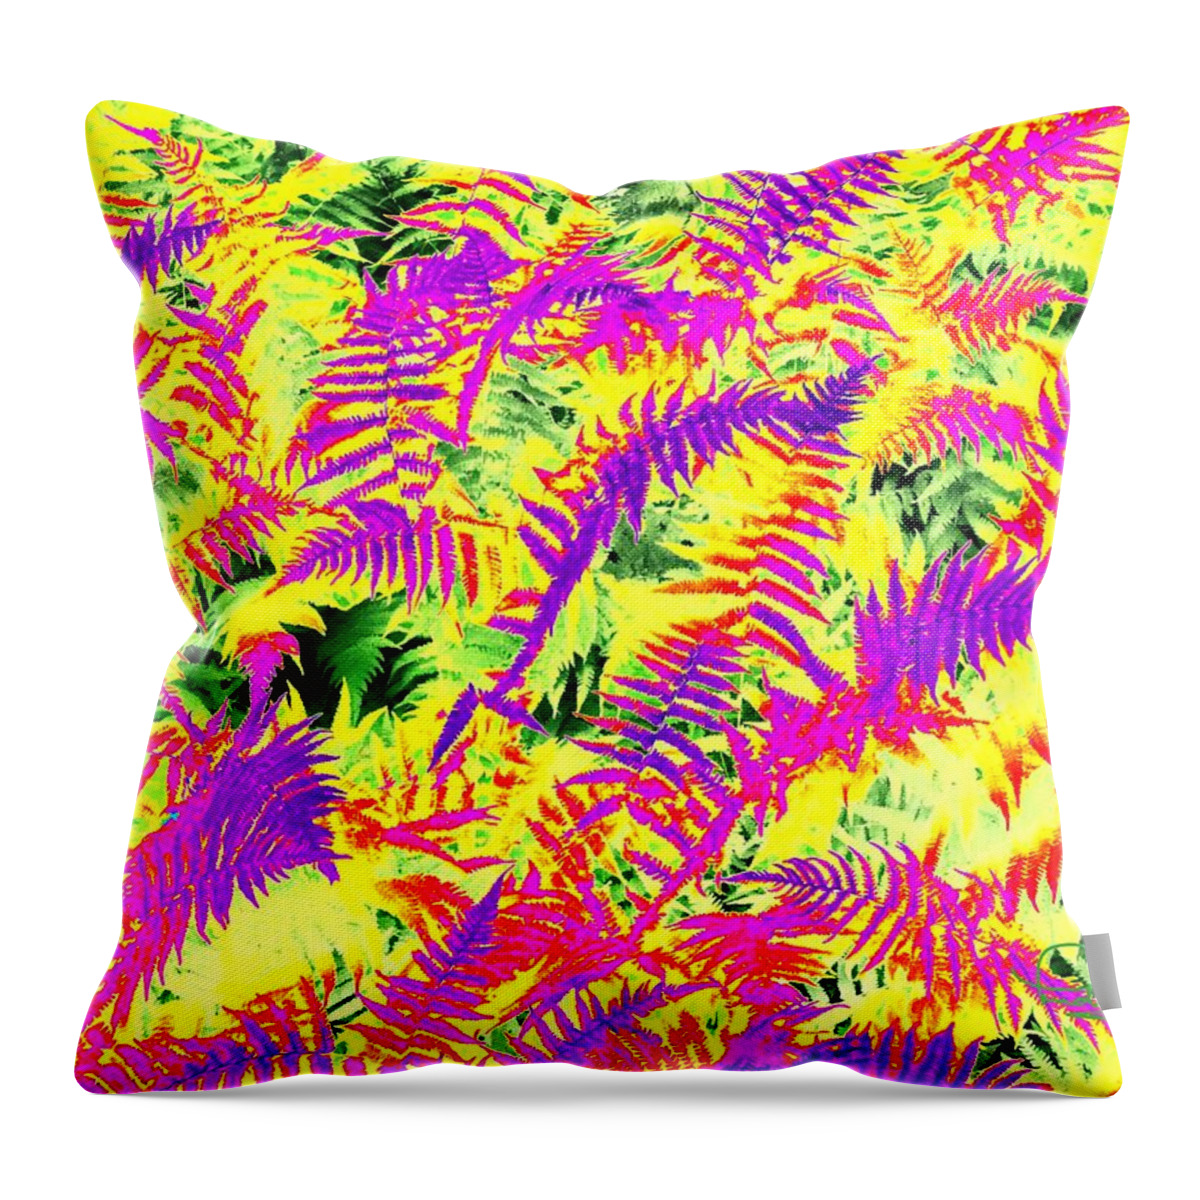 Photo-painting Throw Pillow featuring the digital art Dreaming Ferns by Ludwig Keck